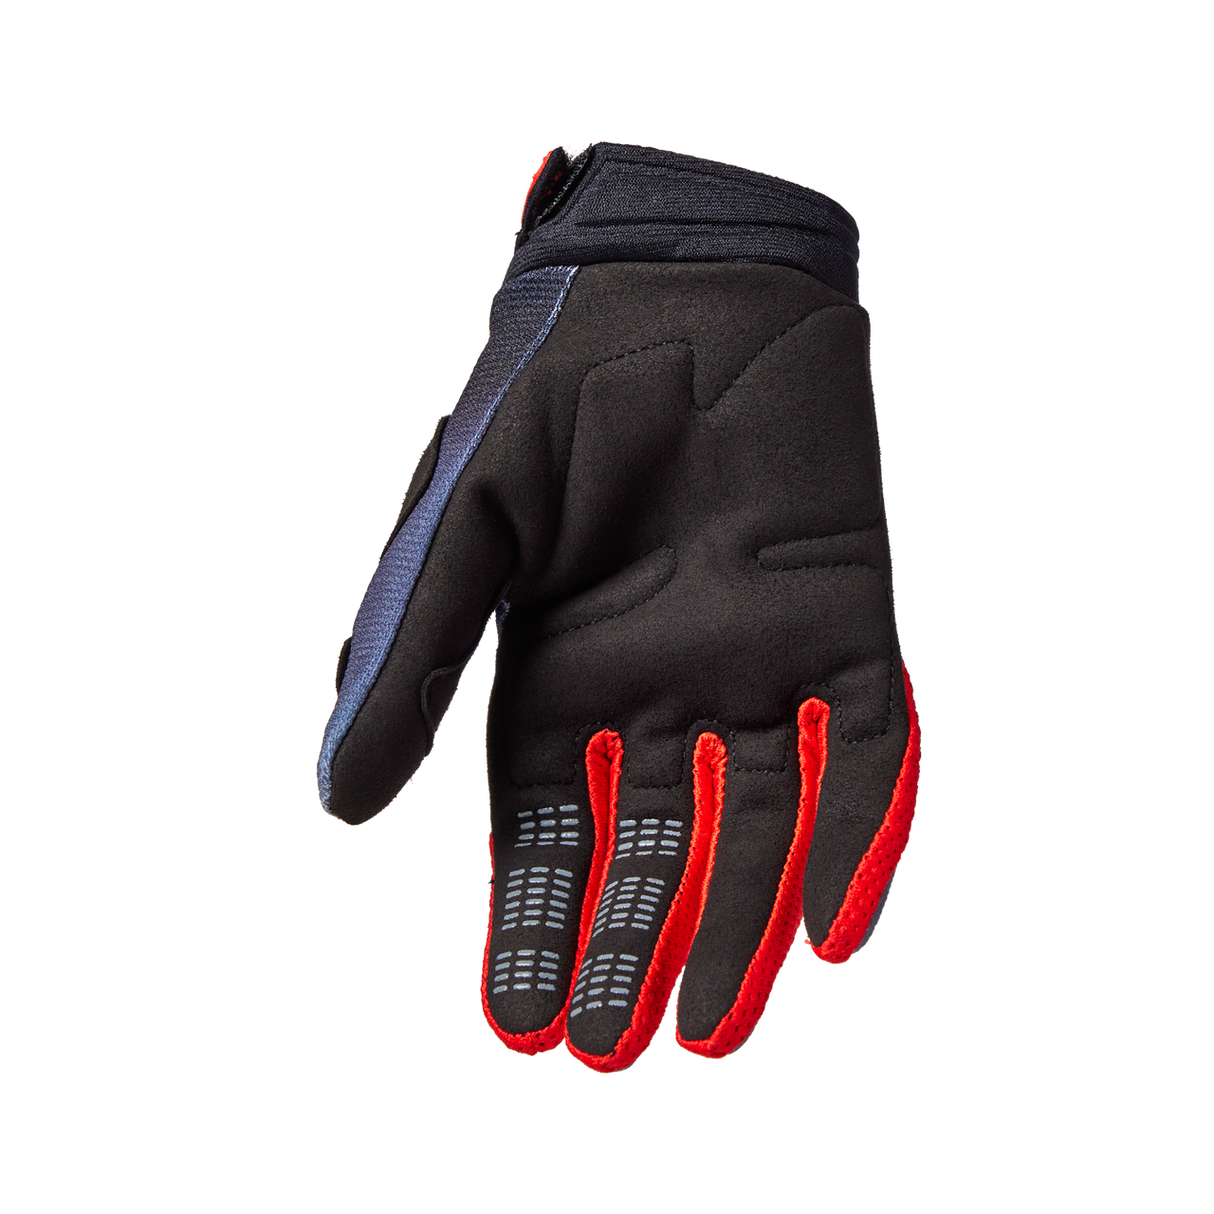 Fox Youth 180 Interfere Gloves Grey/Red